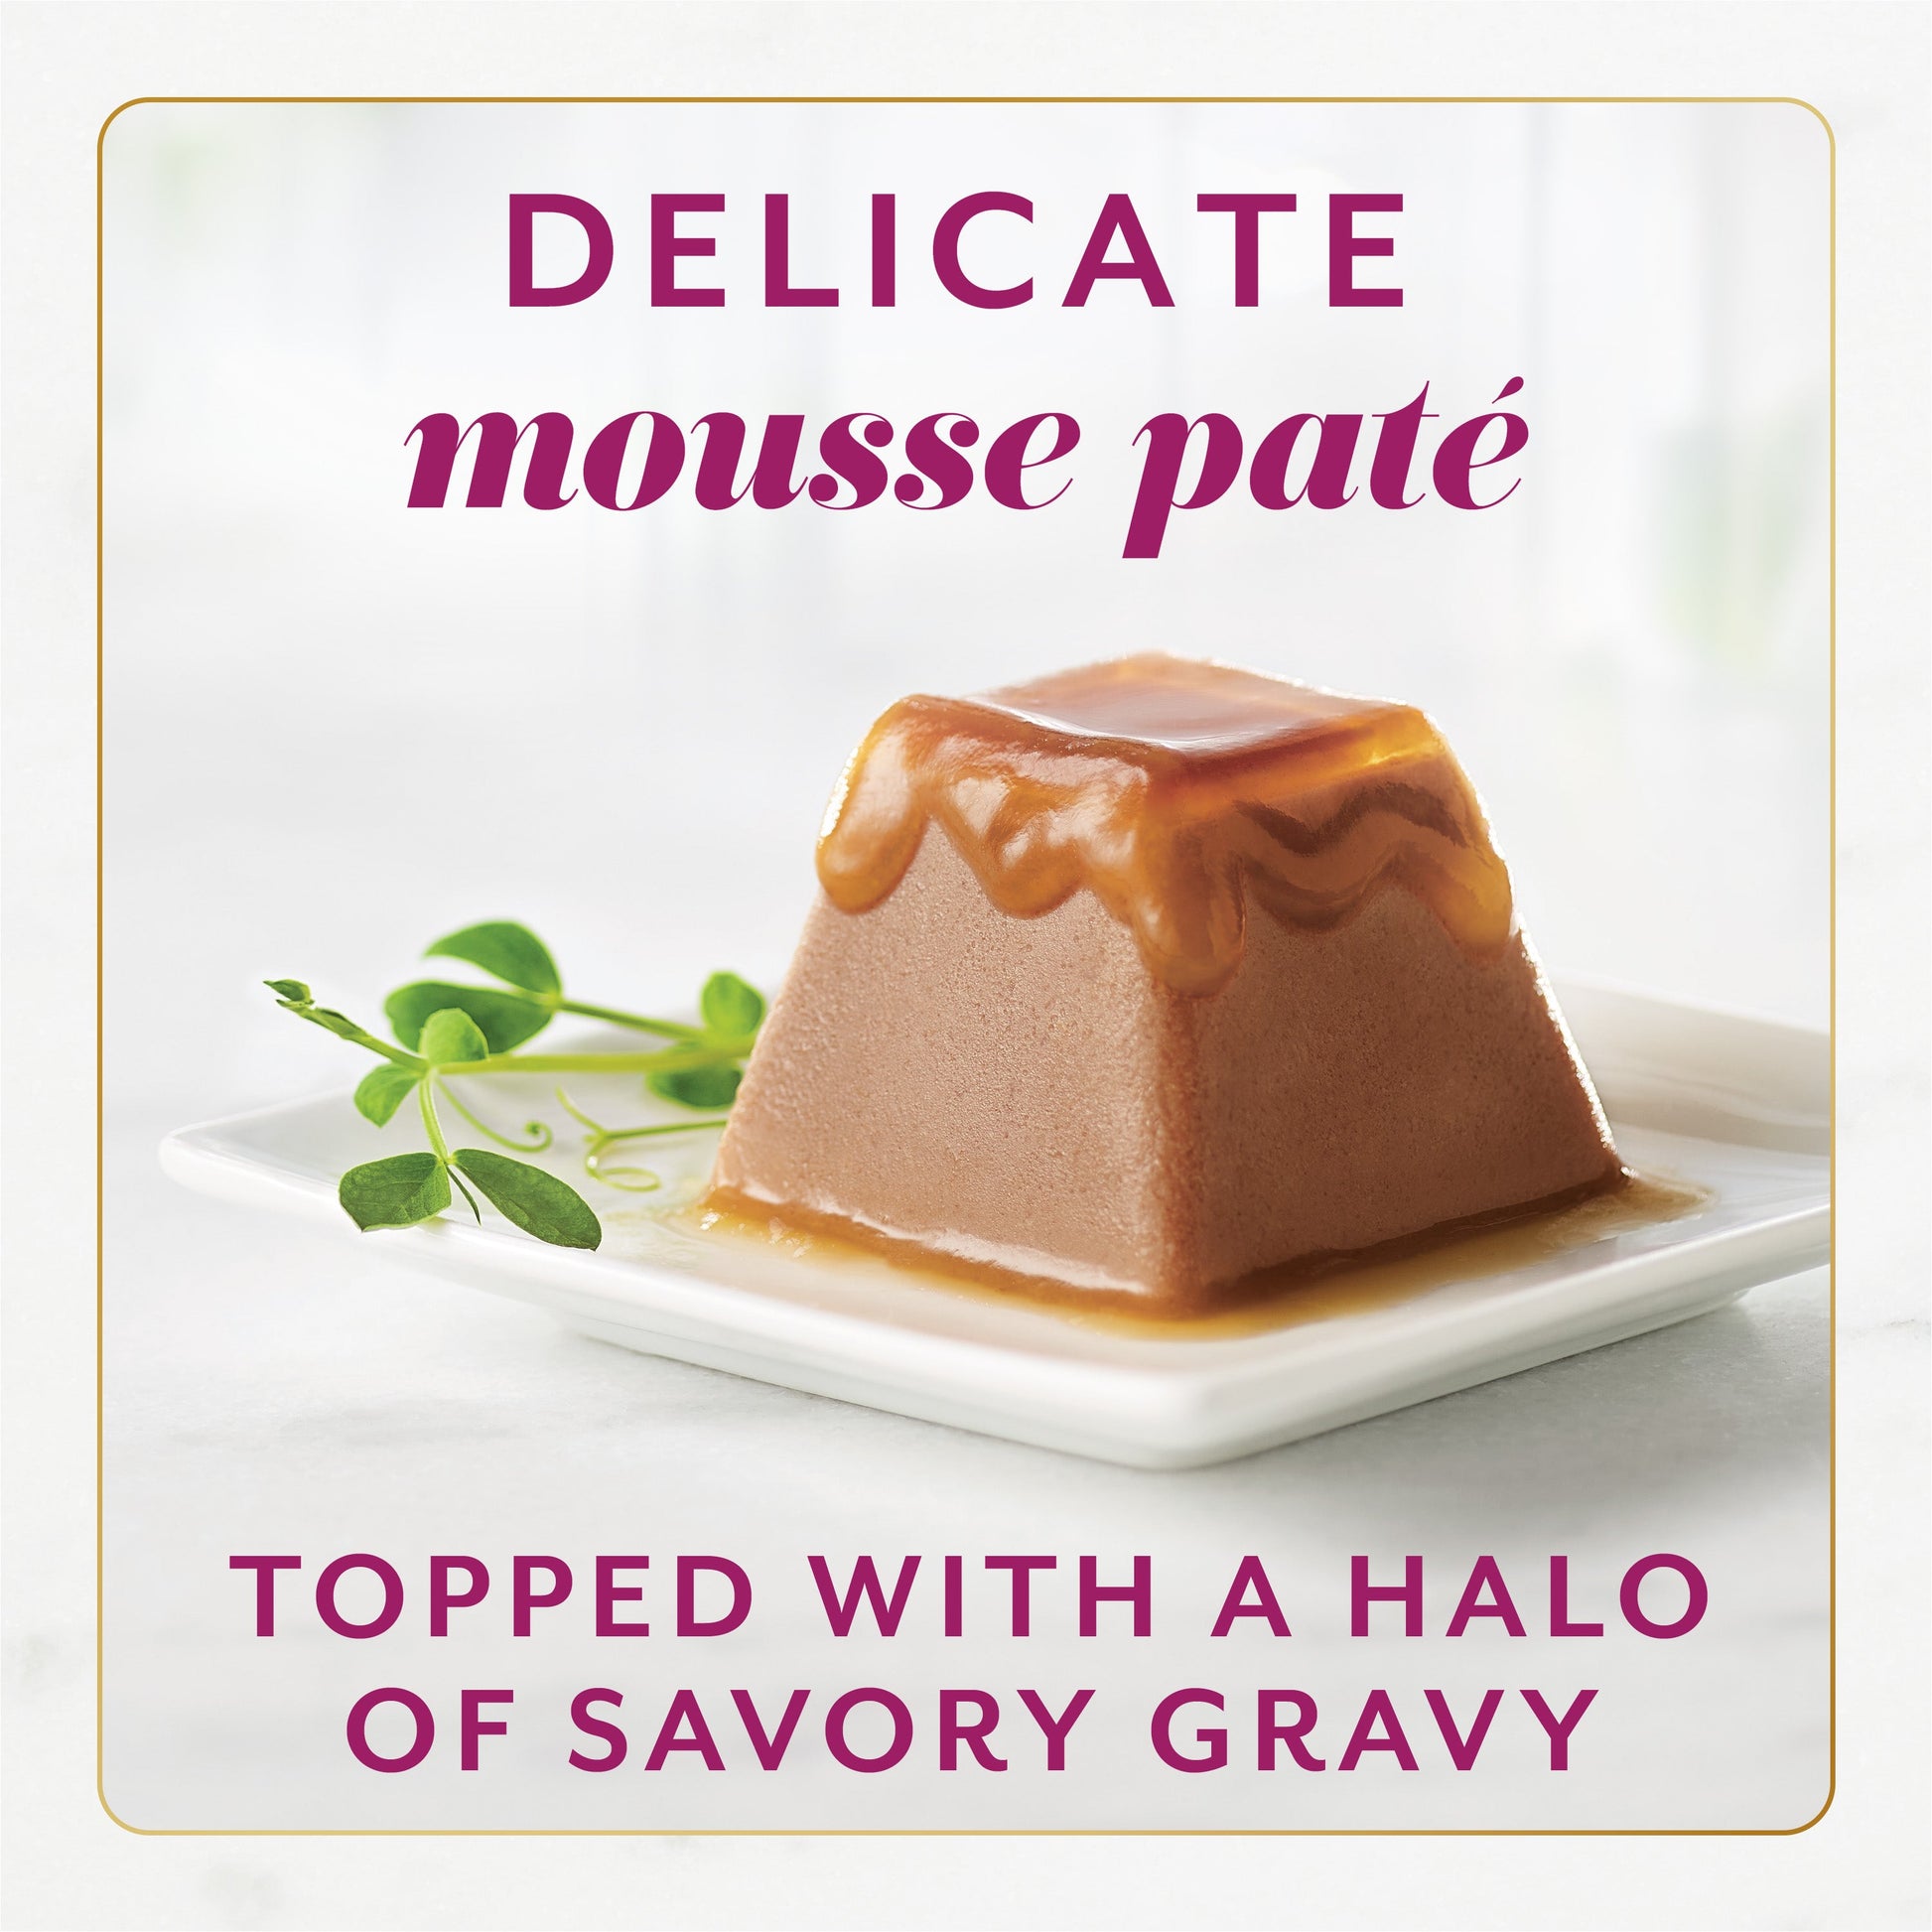 Fancy Feast Gems Delicate beef mousse pate topped with a halo of savory gravy